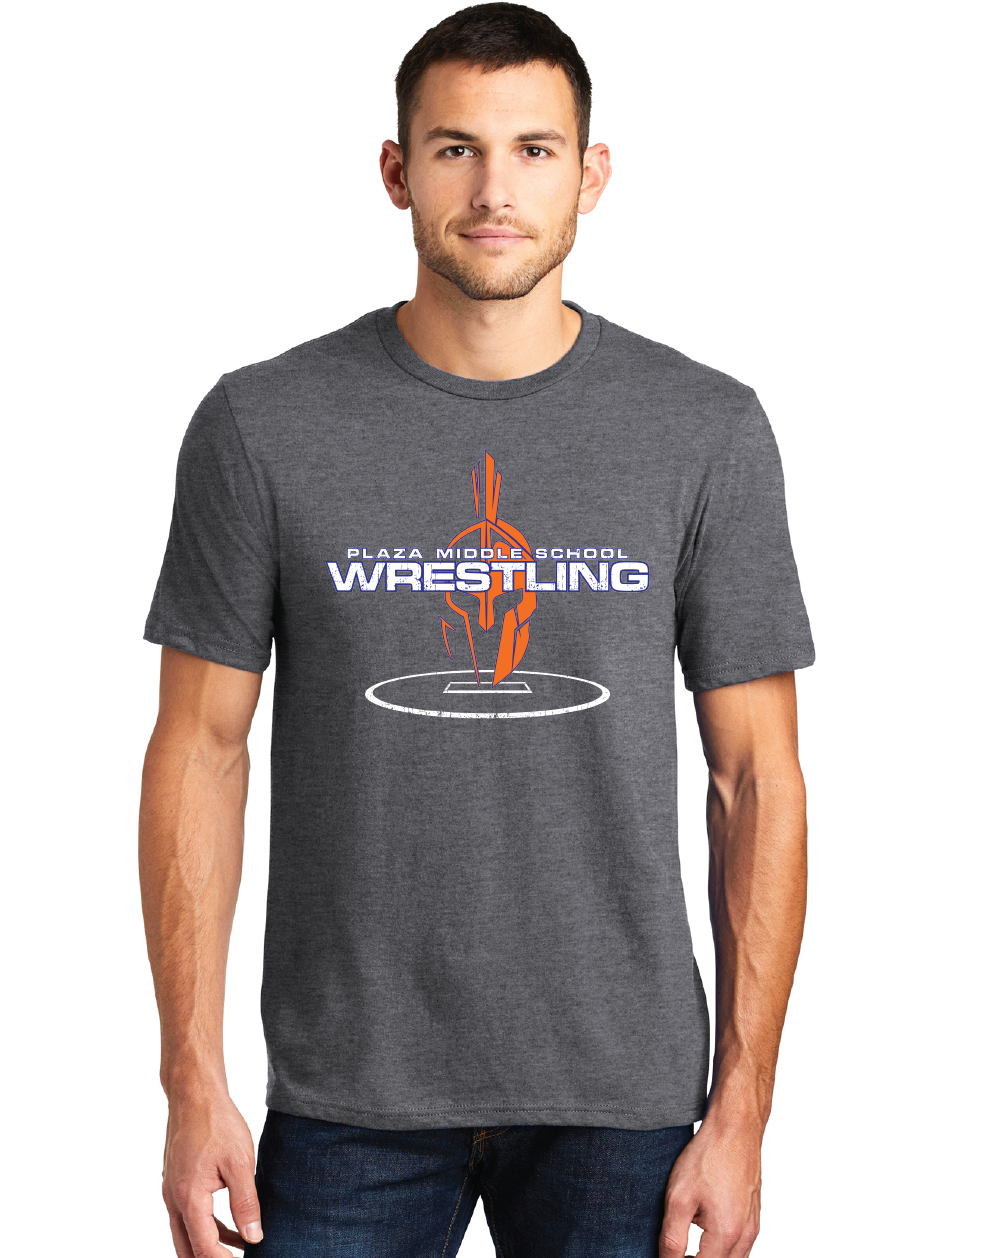 Very Important Tee / Heathered Charcoal / Plaza Middle School Wrestling